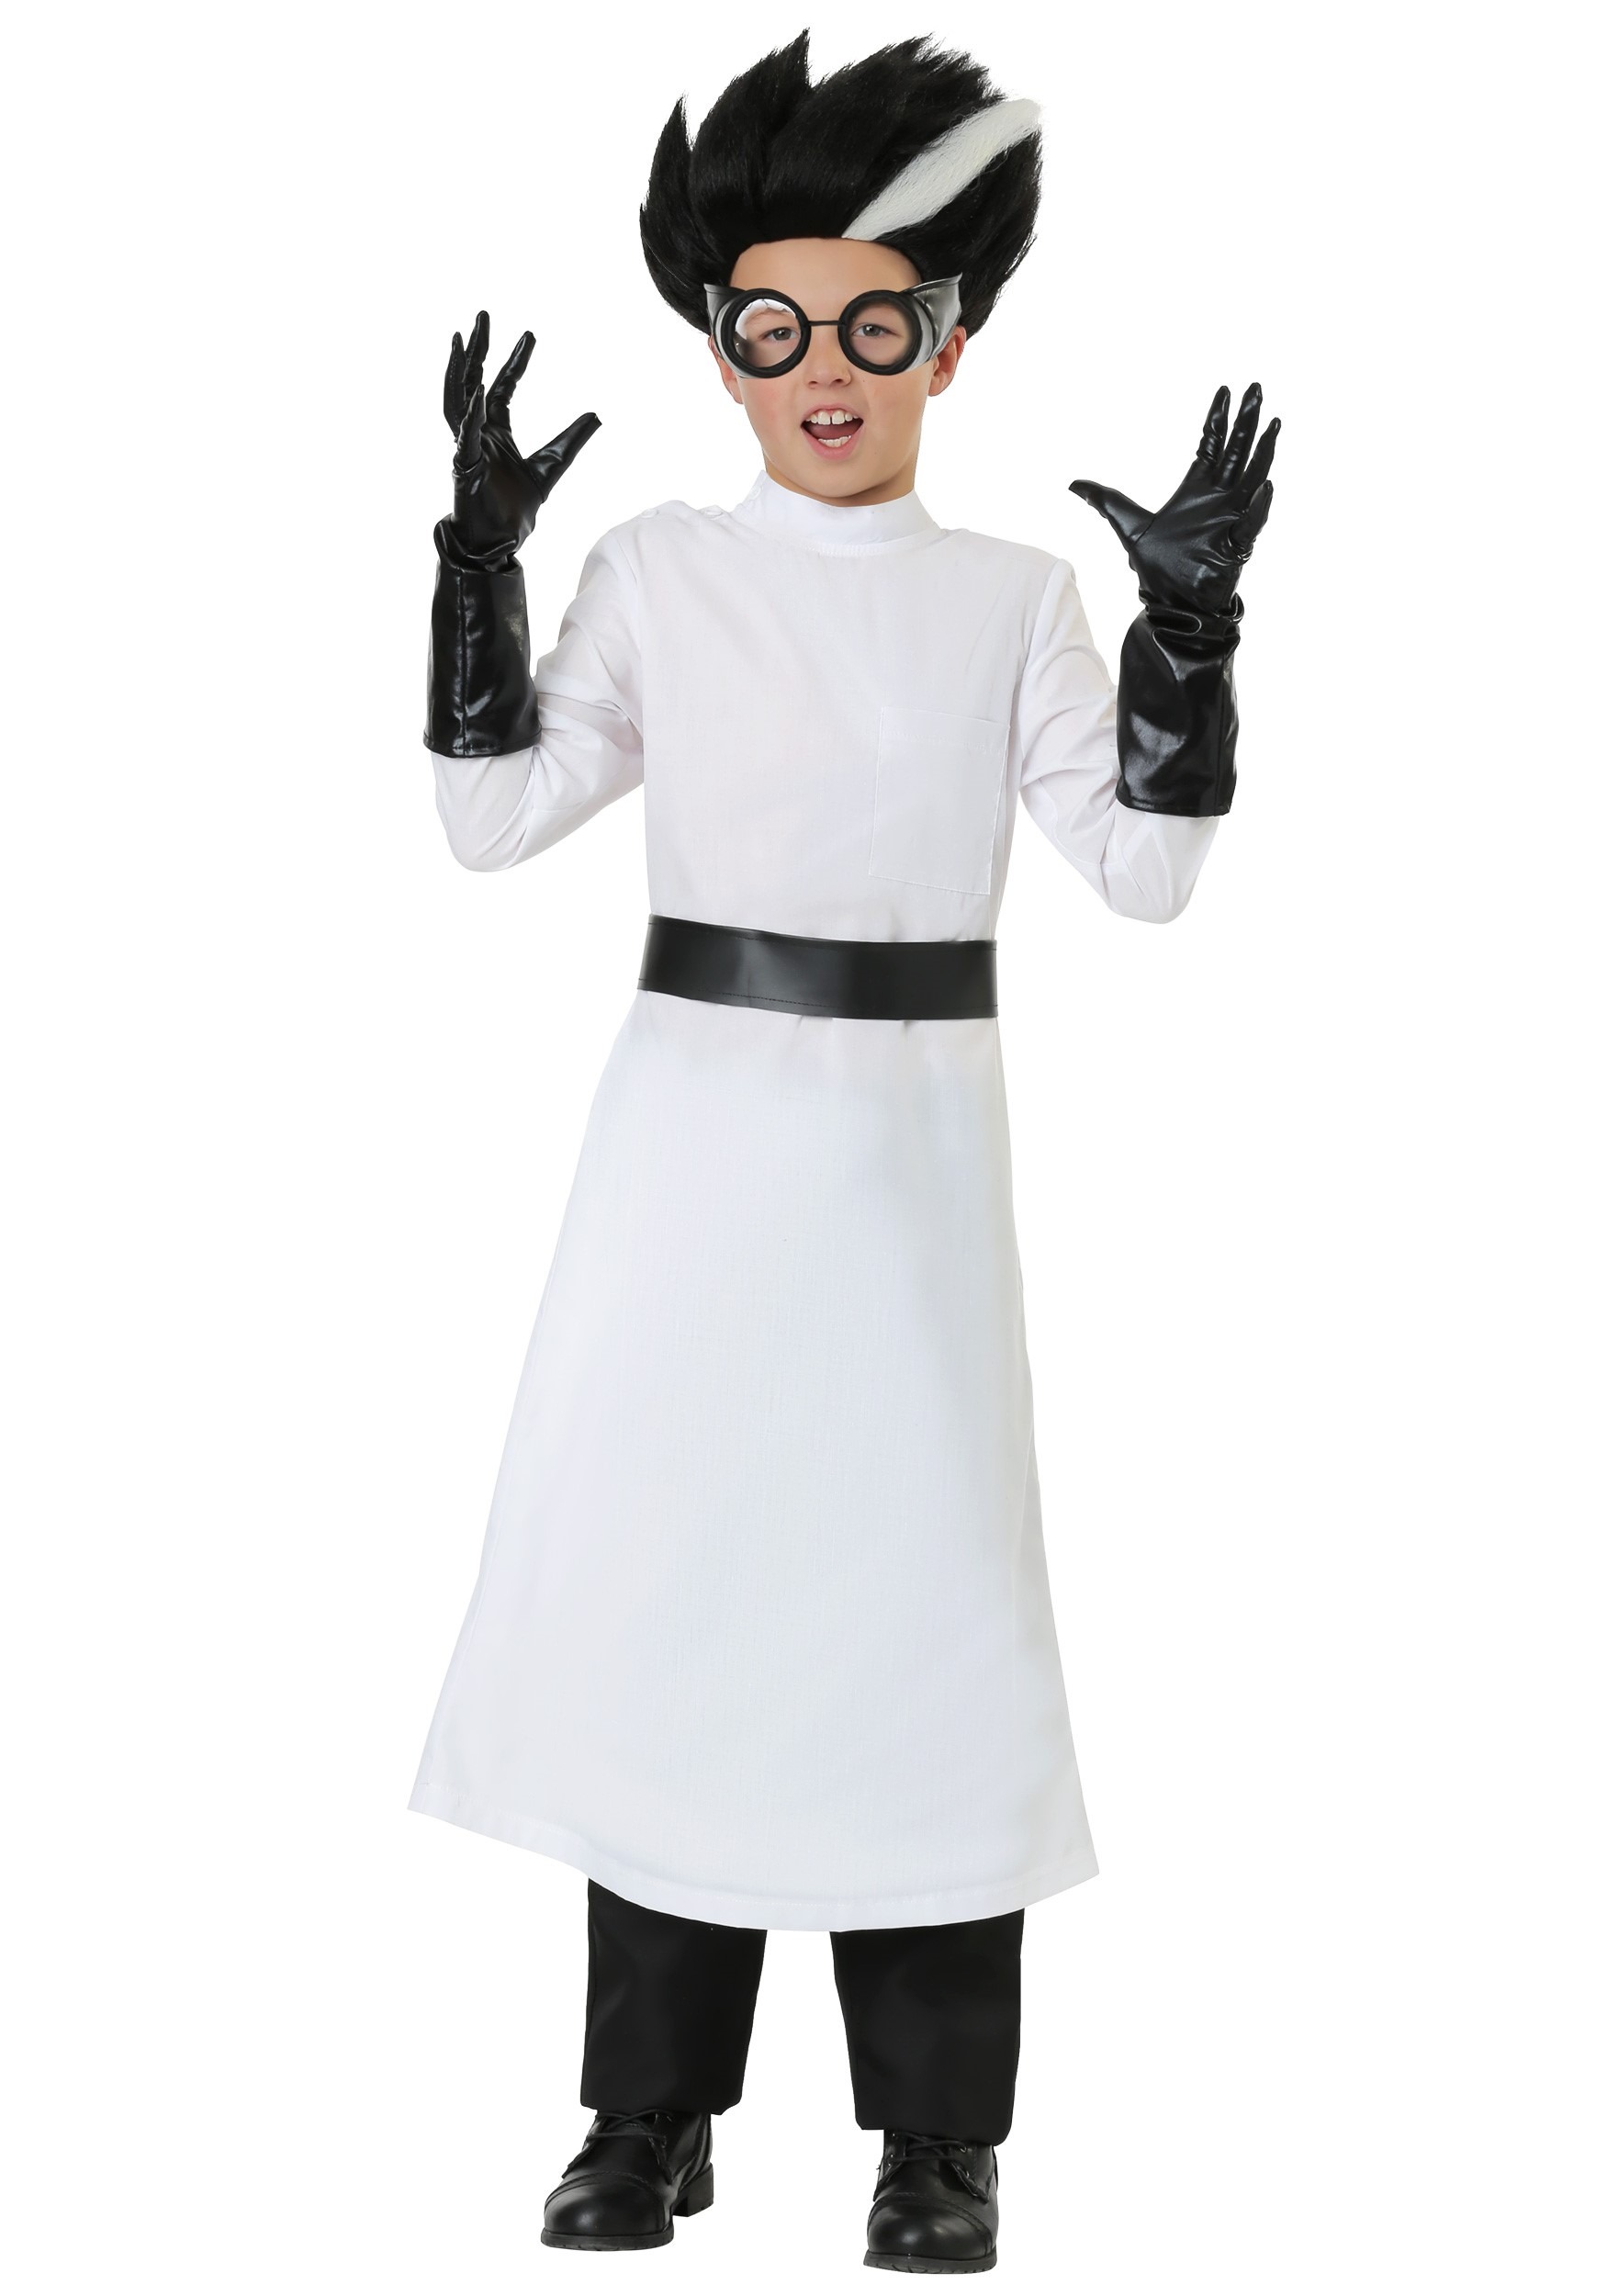 Photos - Fancy Dress MAD FUN Costumes  Scientist Costume for Kids Black/White FUN0148CH 